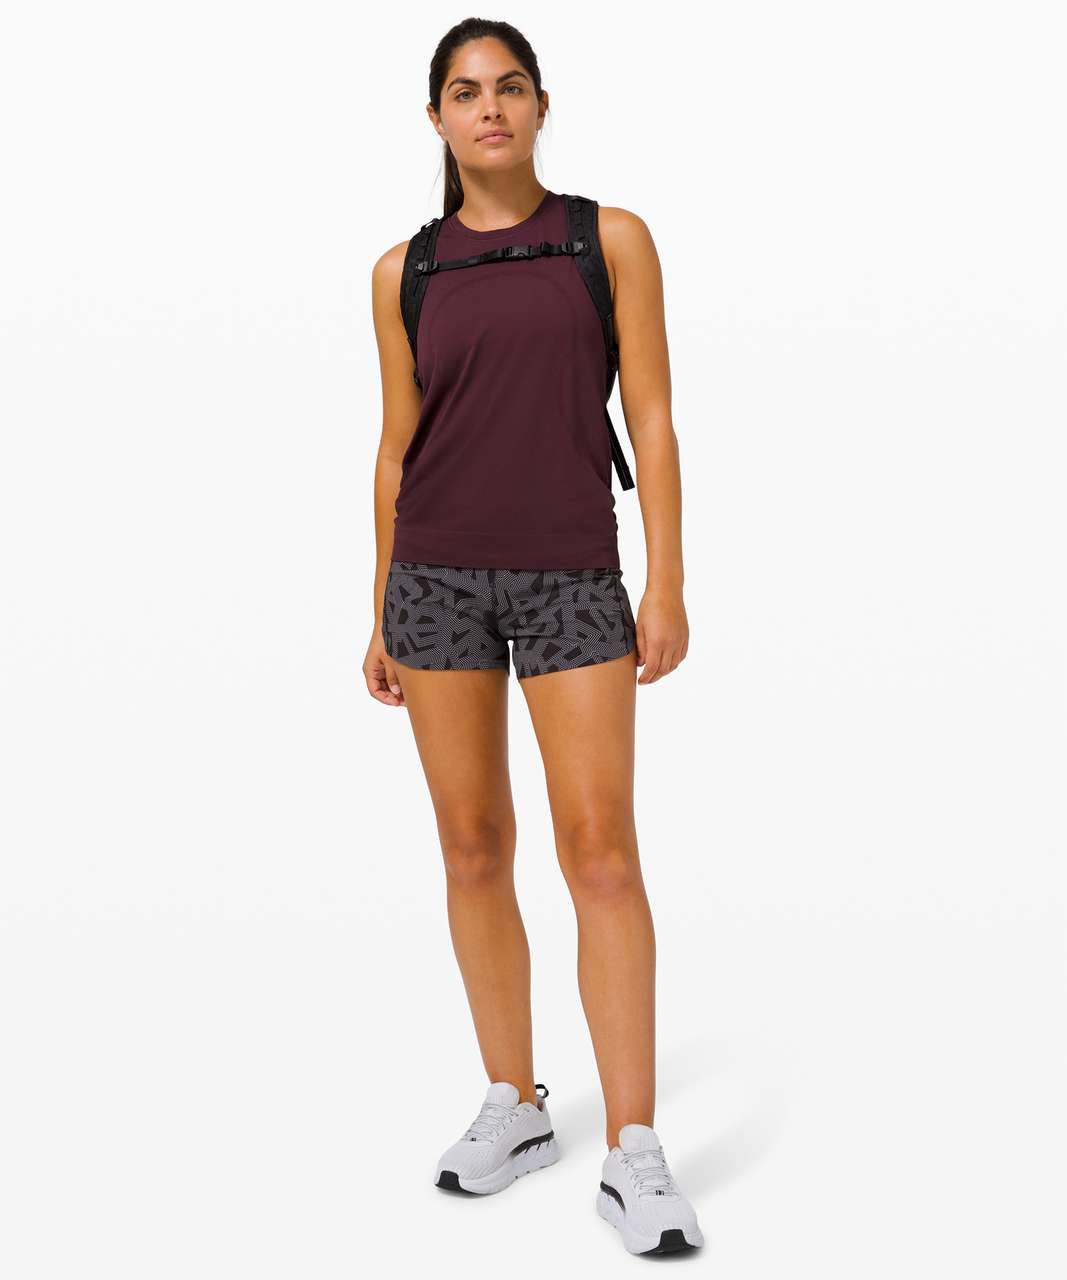 Lululemon Swiftly Breathe Muscle Tank - Cassis / Cassis